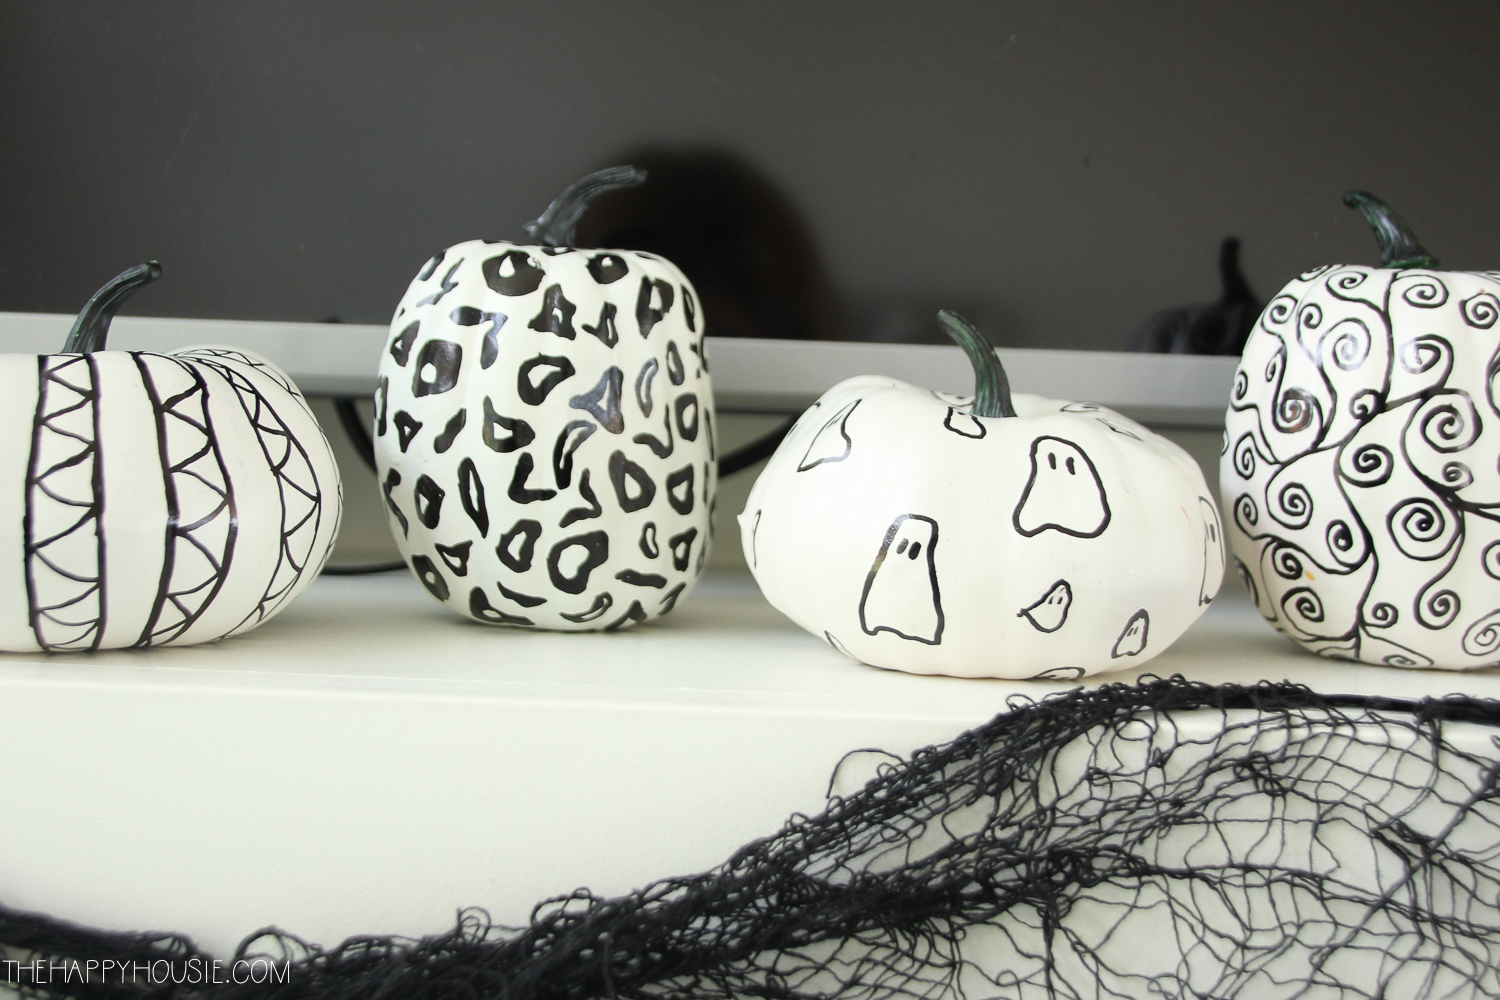 There are white pumpkins with drawings of detail on them with the black sharpie.